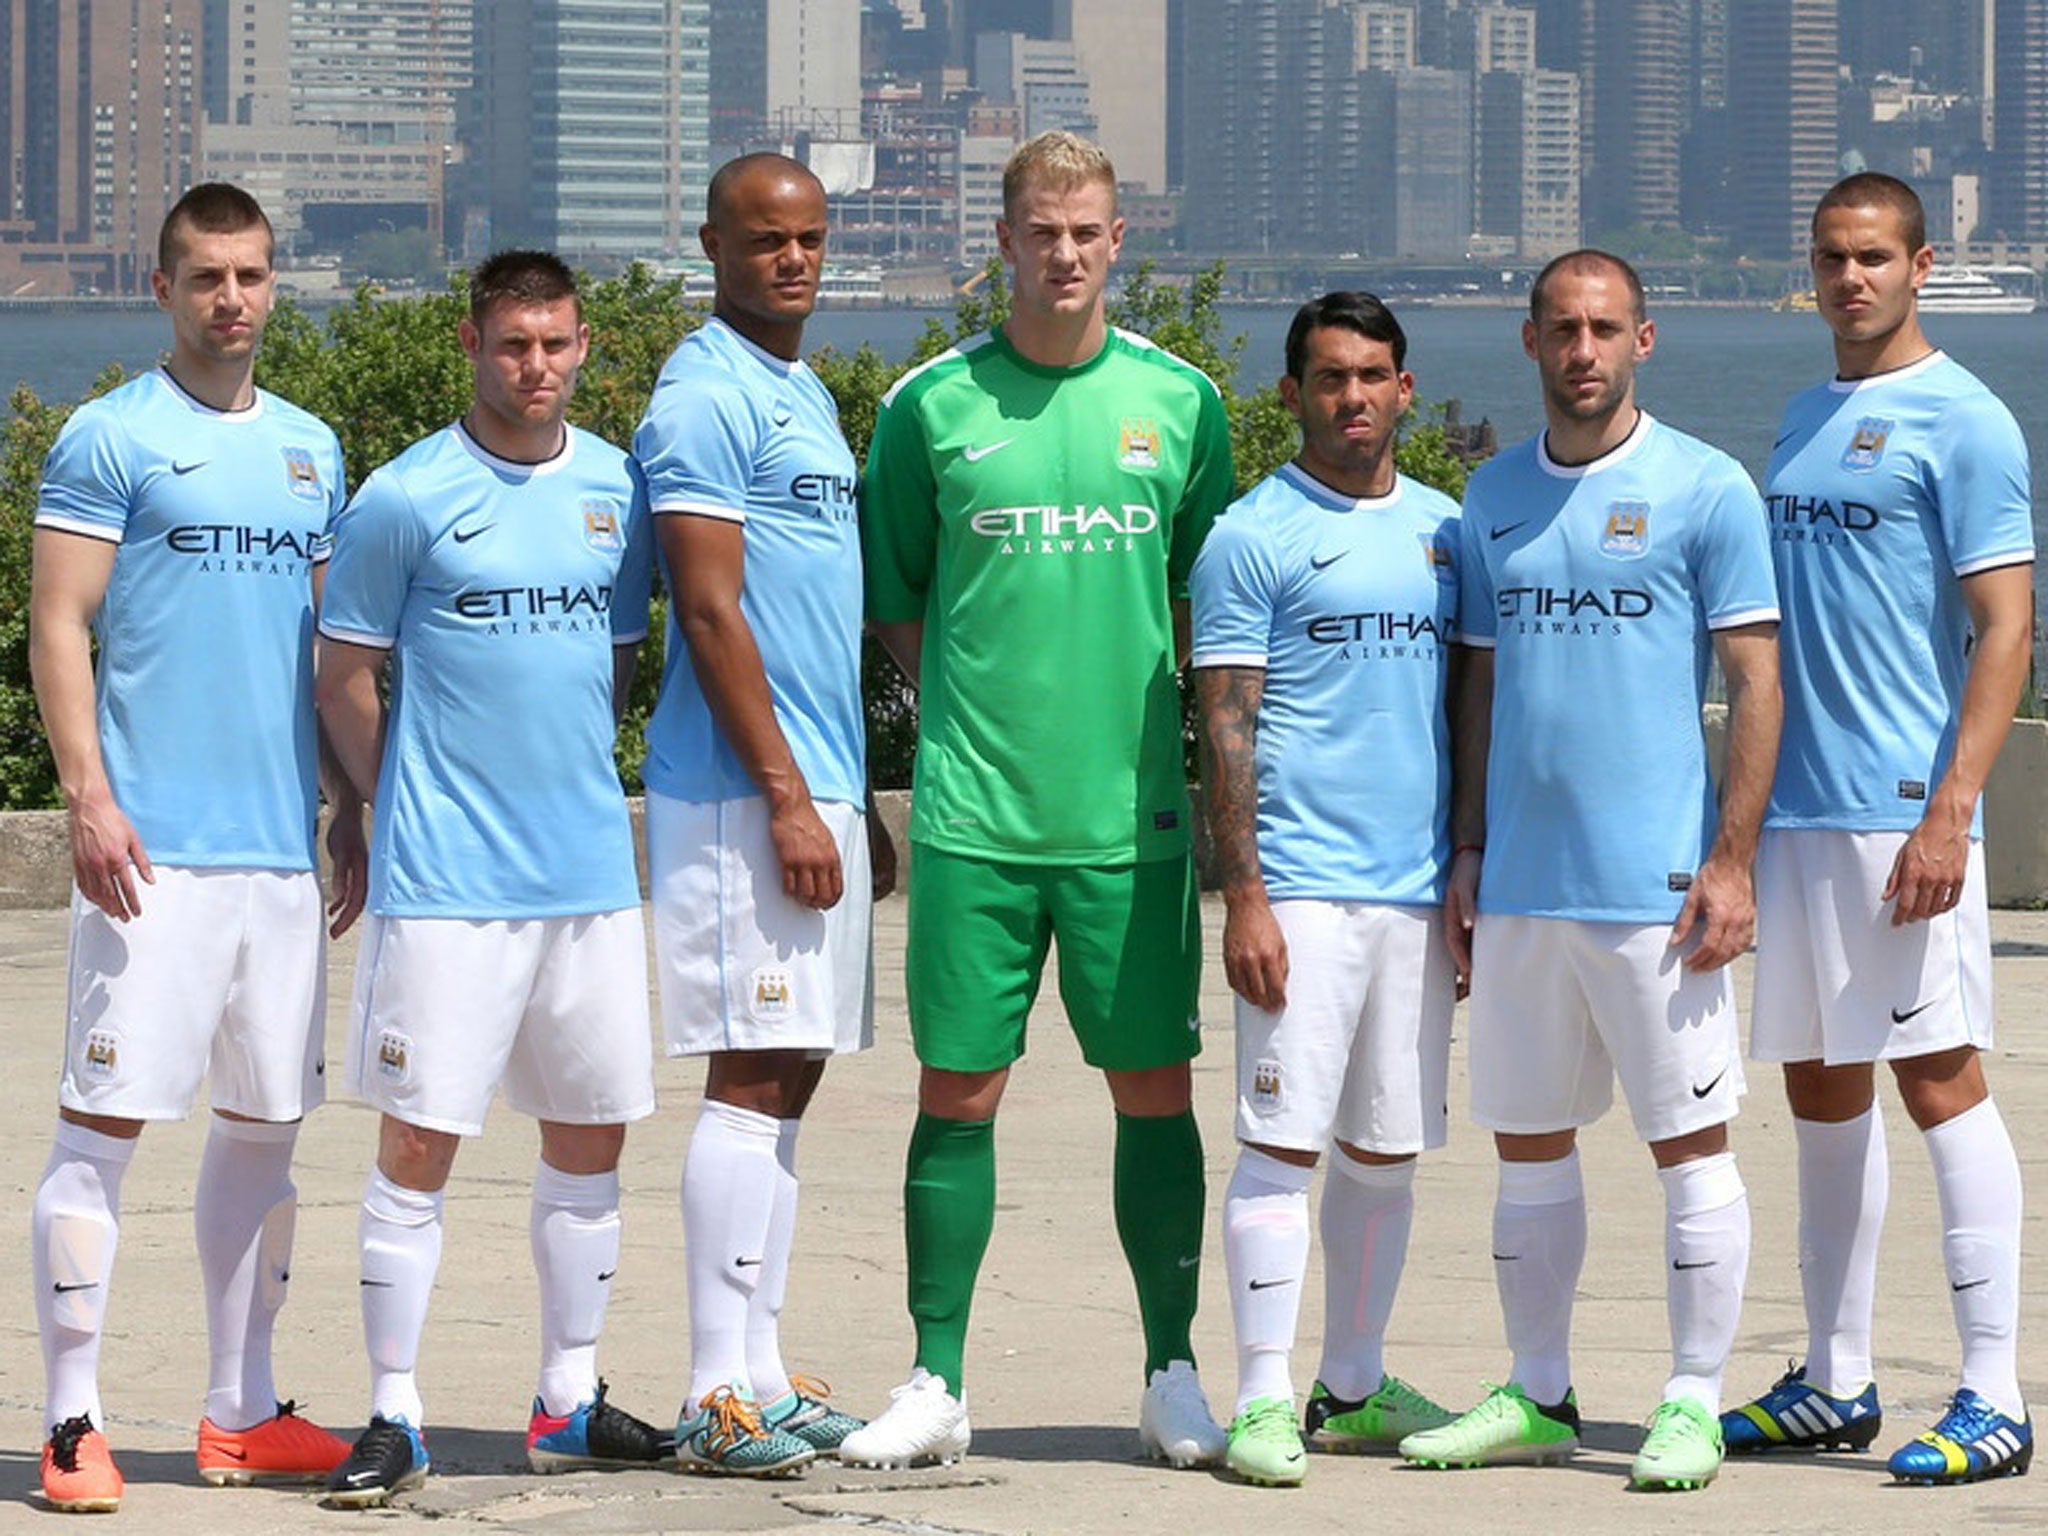 City players model the new kit in front of the New York skyline